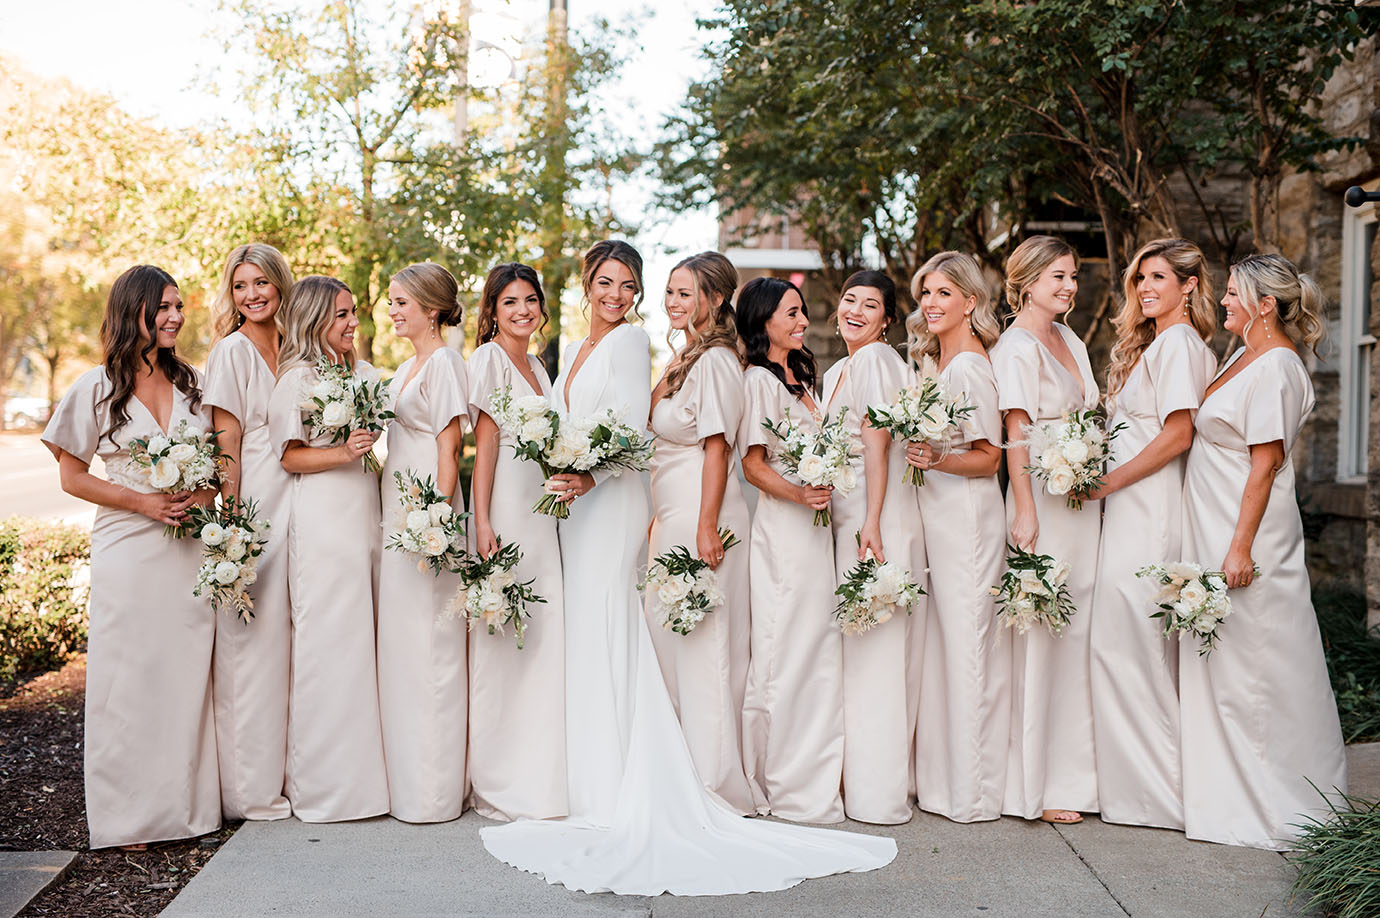 Kristen and bridesmaids wearing custom matching soft pink gowns while carrying posy versions of her bridal bouquet